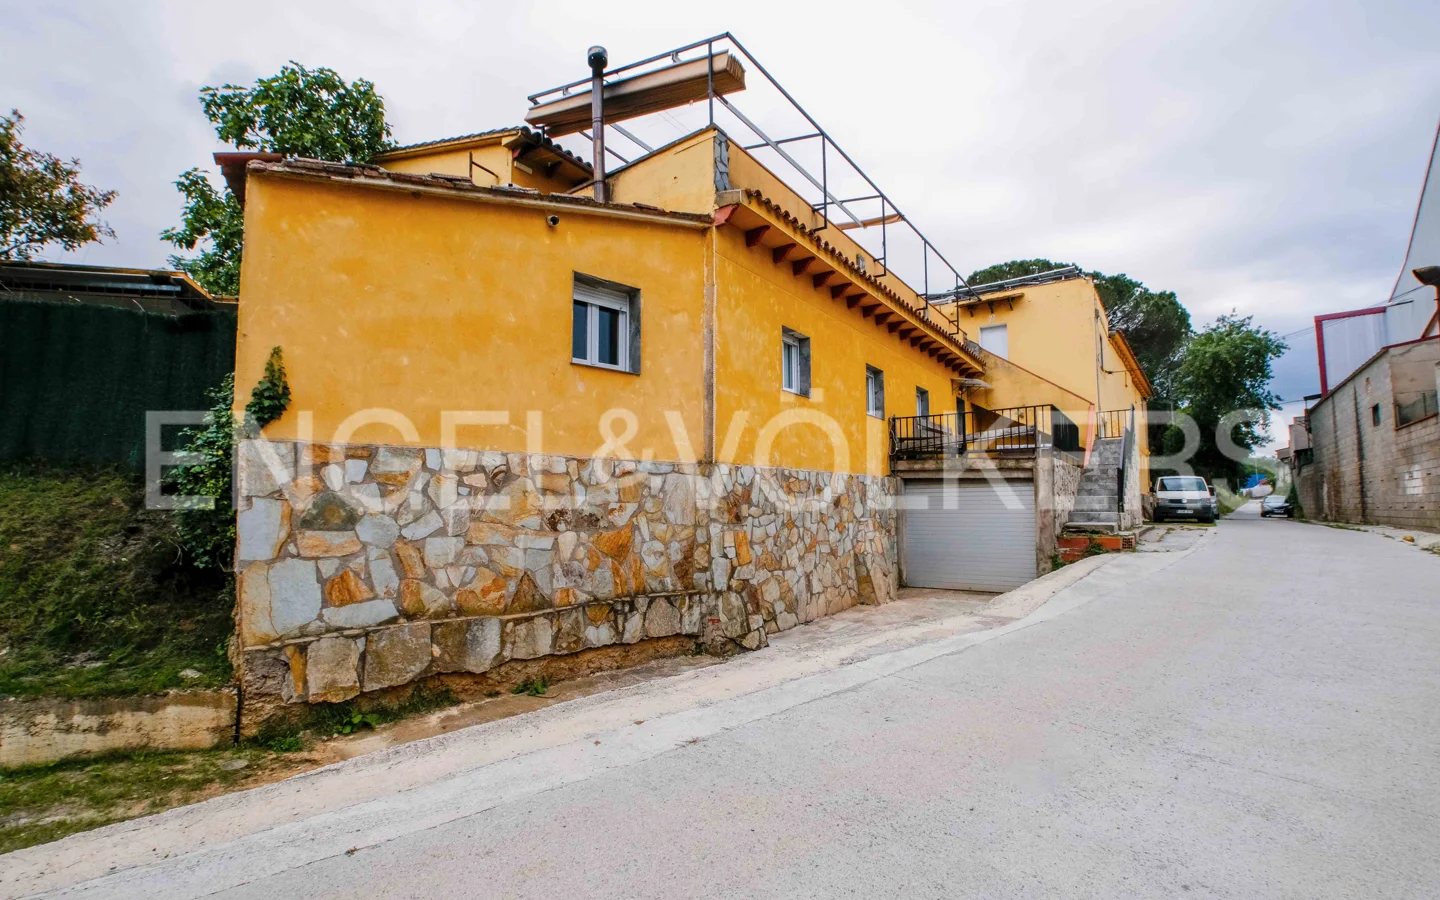 Unique property in Ravós del Terri with 3 houses and large plot!